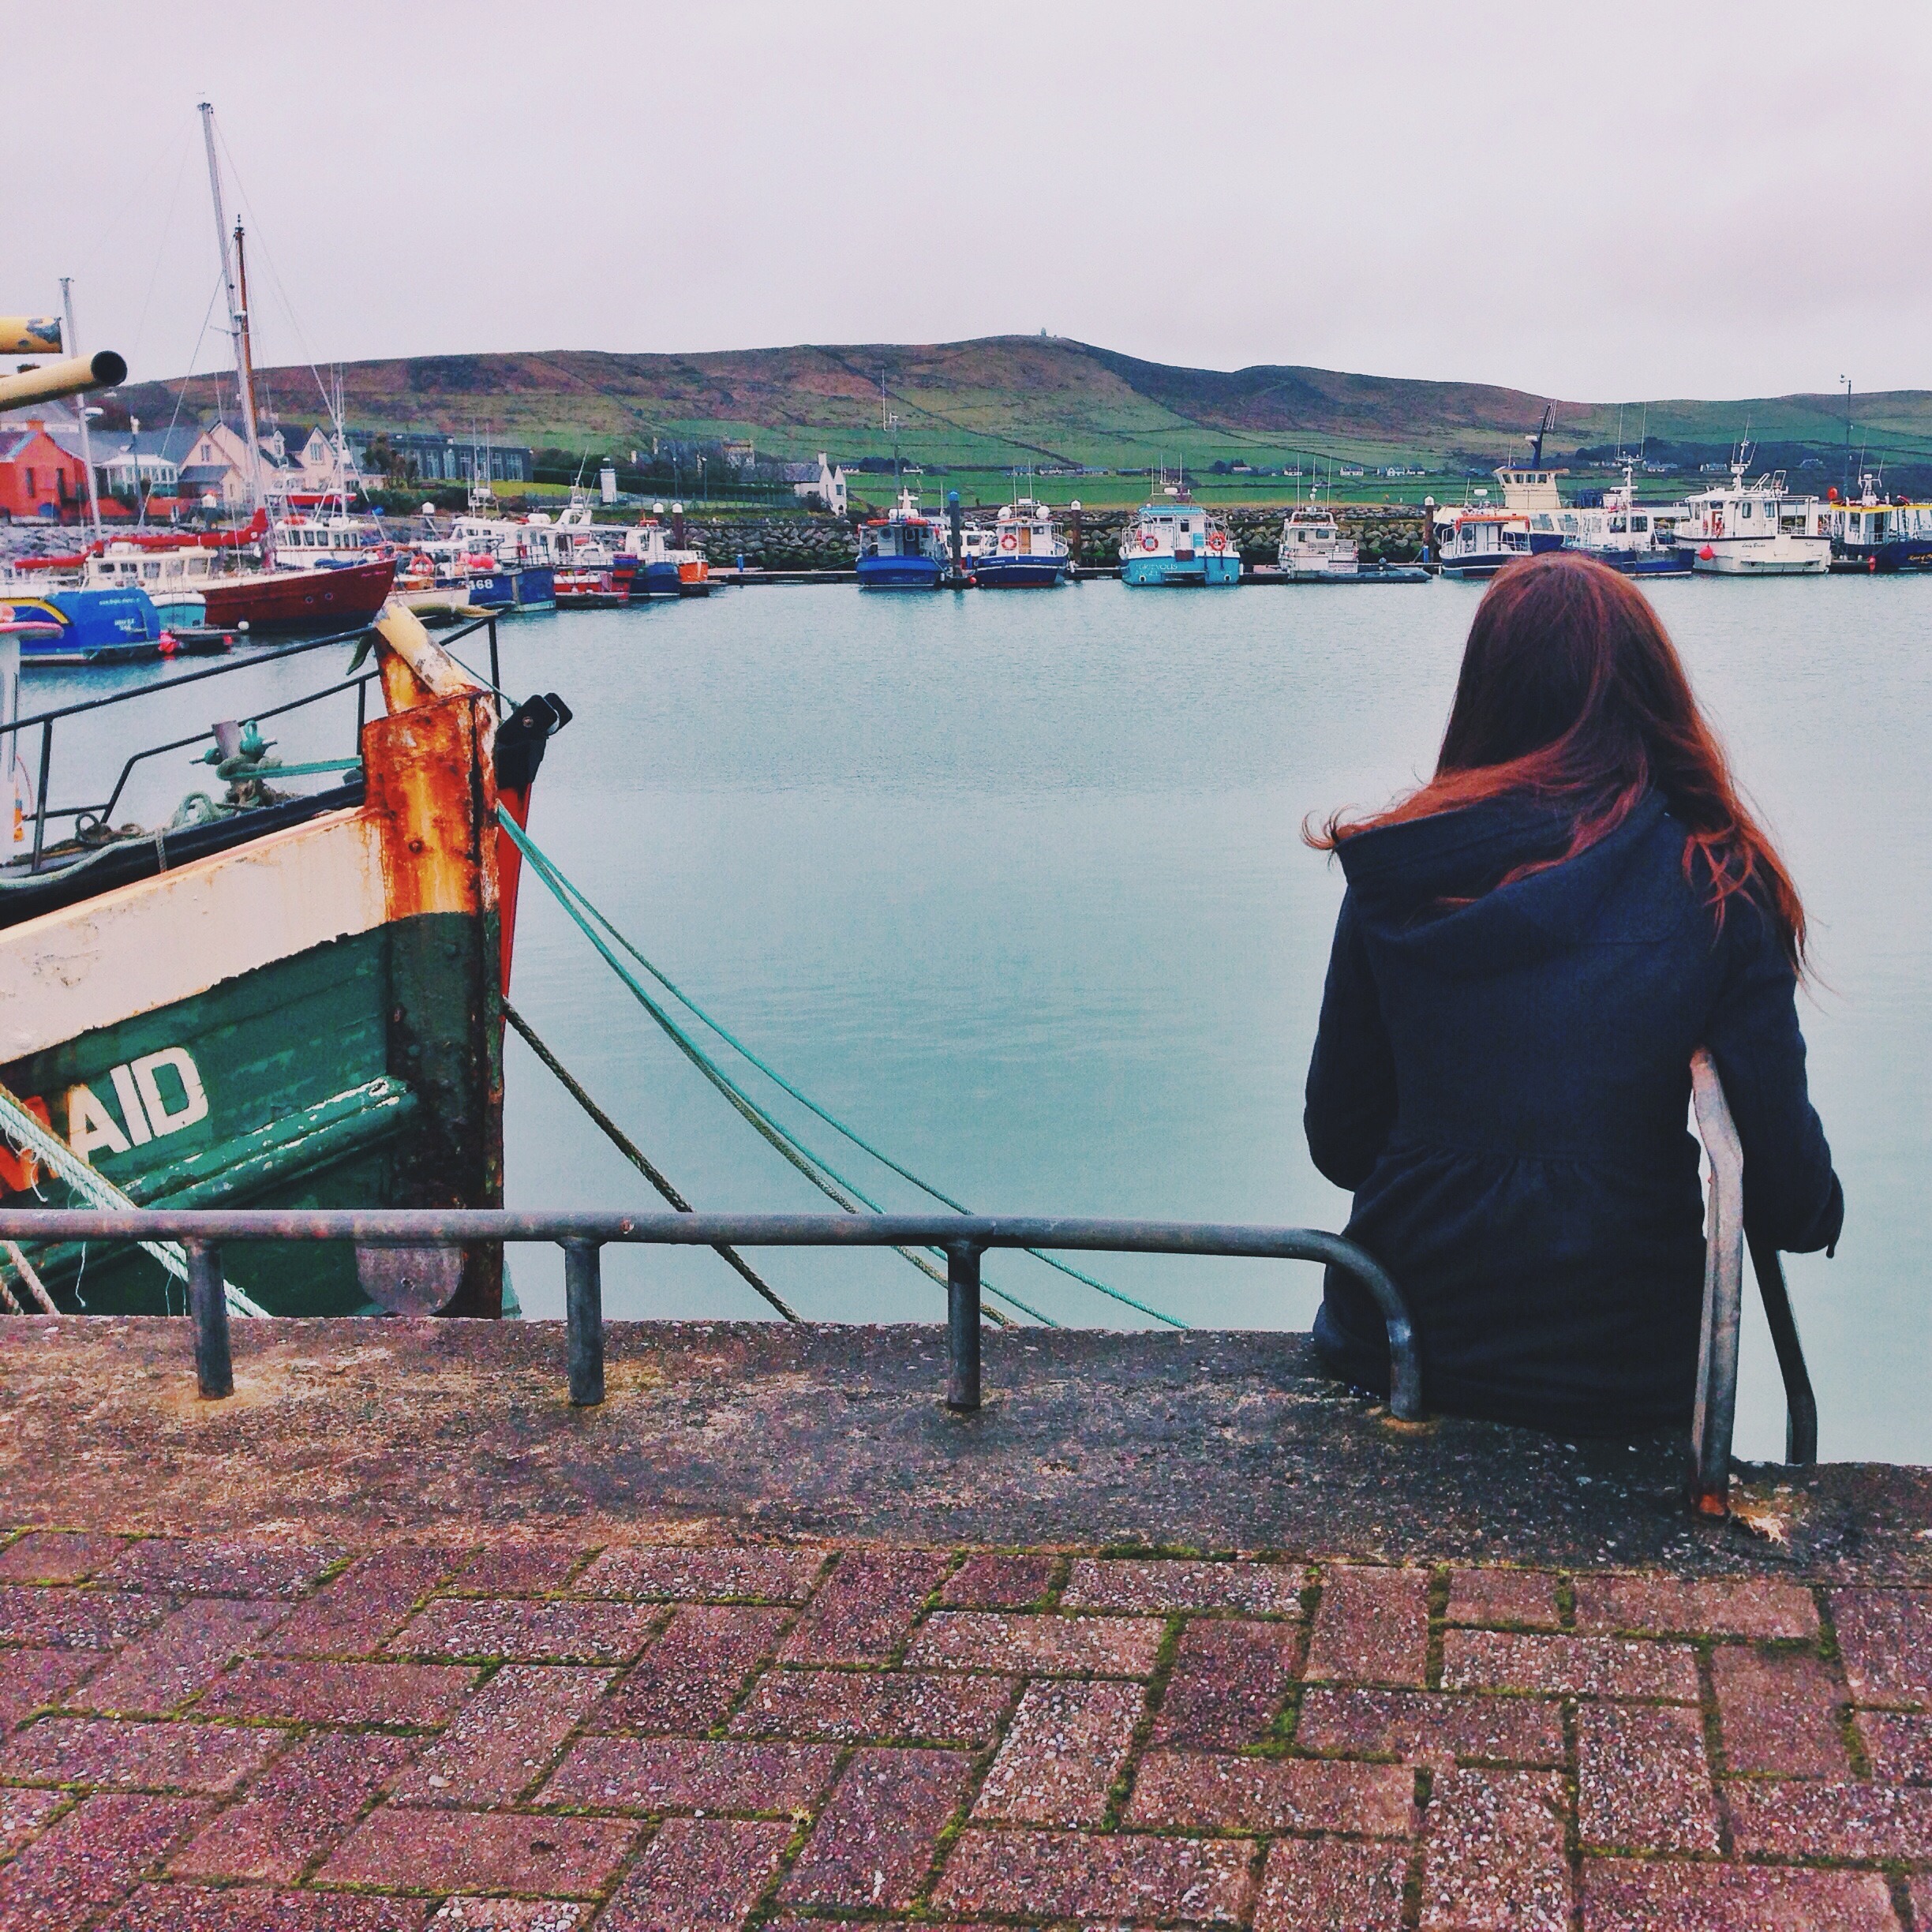   "The Harbor" &nbsp;ft. Chelsea McCall  Dingle, Ireland || March 2014 || iPhone 5 